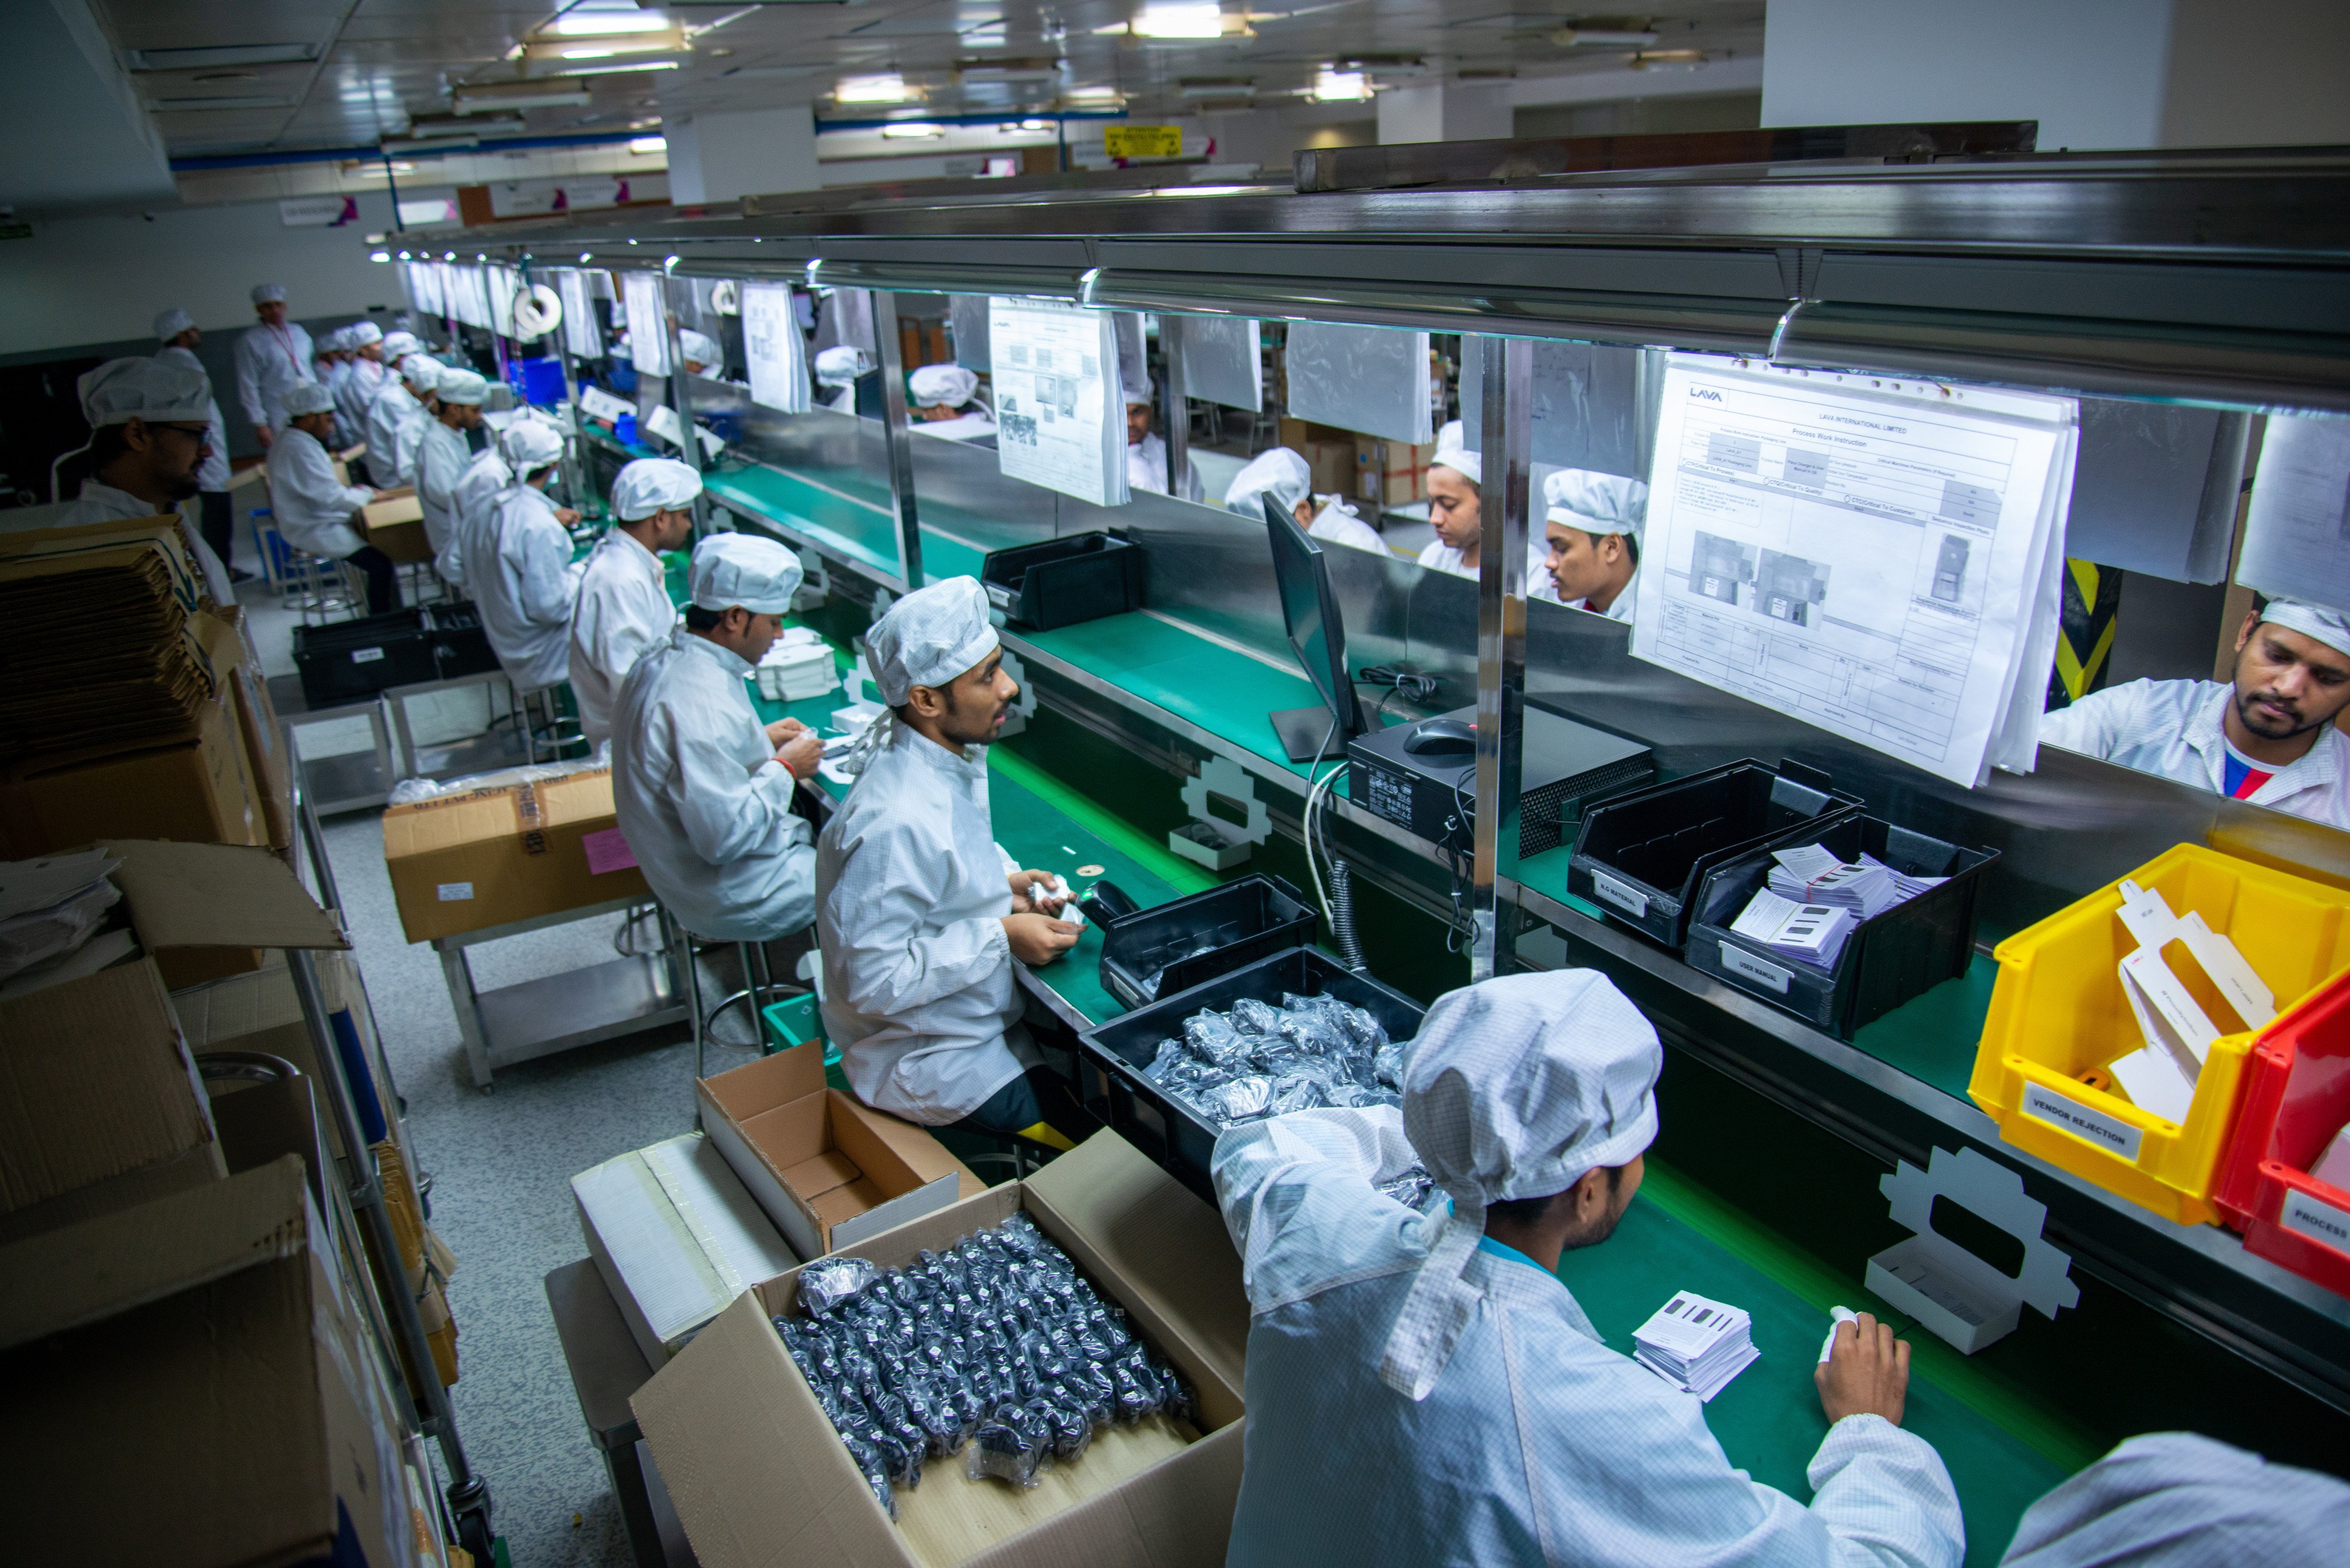 A group of technicians working in a mobile manufacturing plant in Noida, India, on October 23, 2019. Photo: Shutterstock